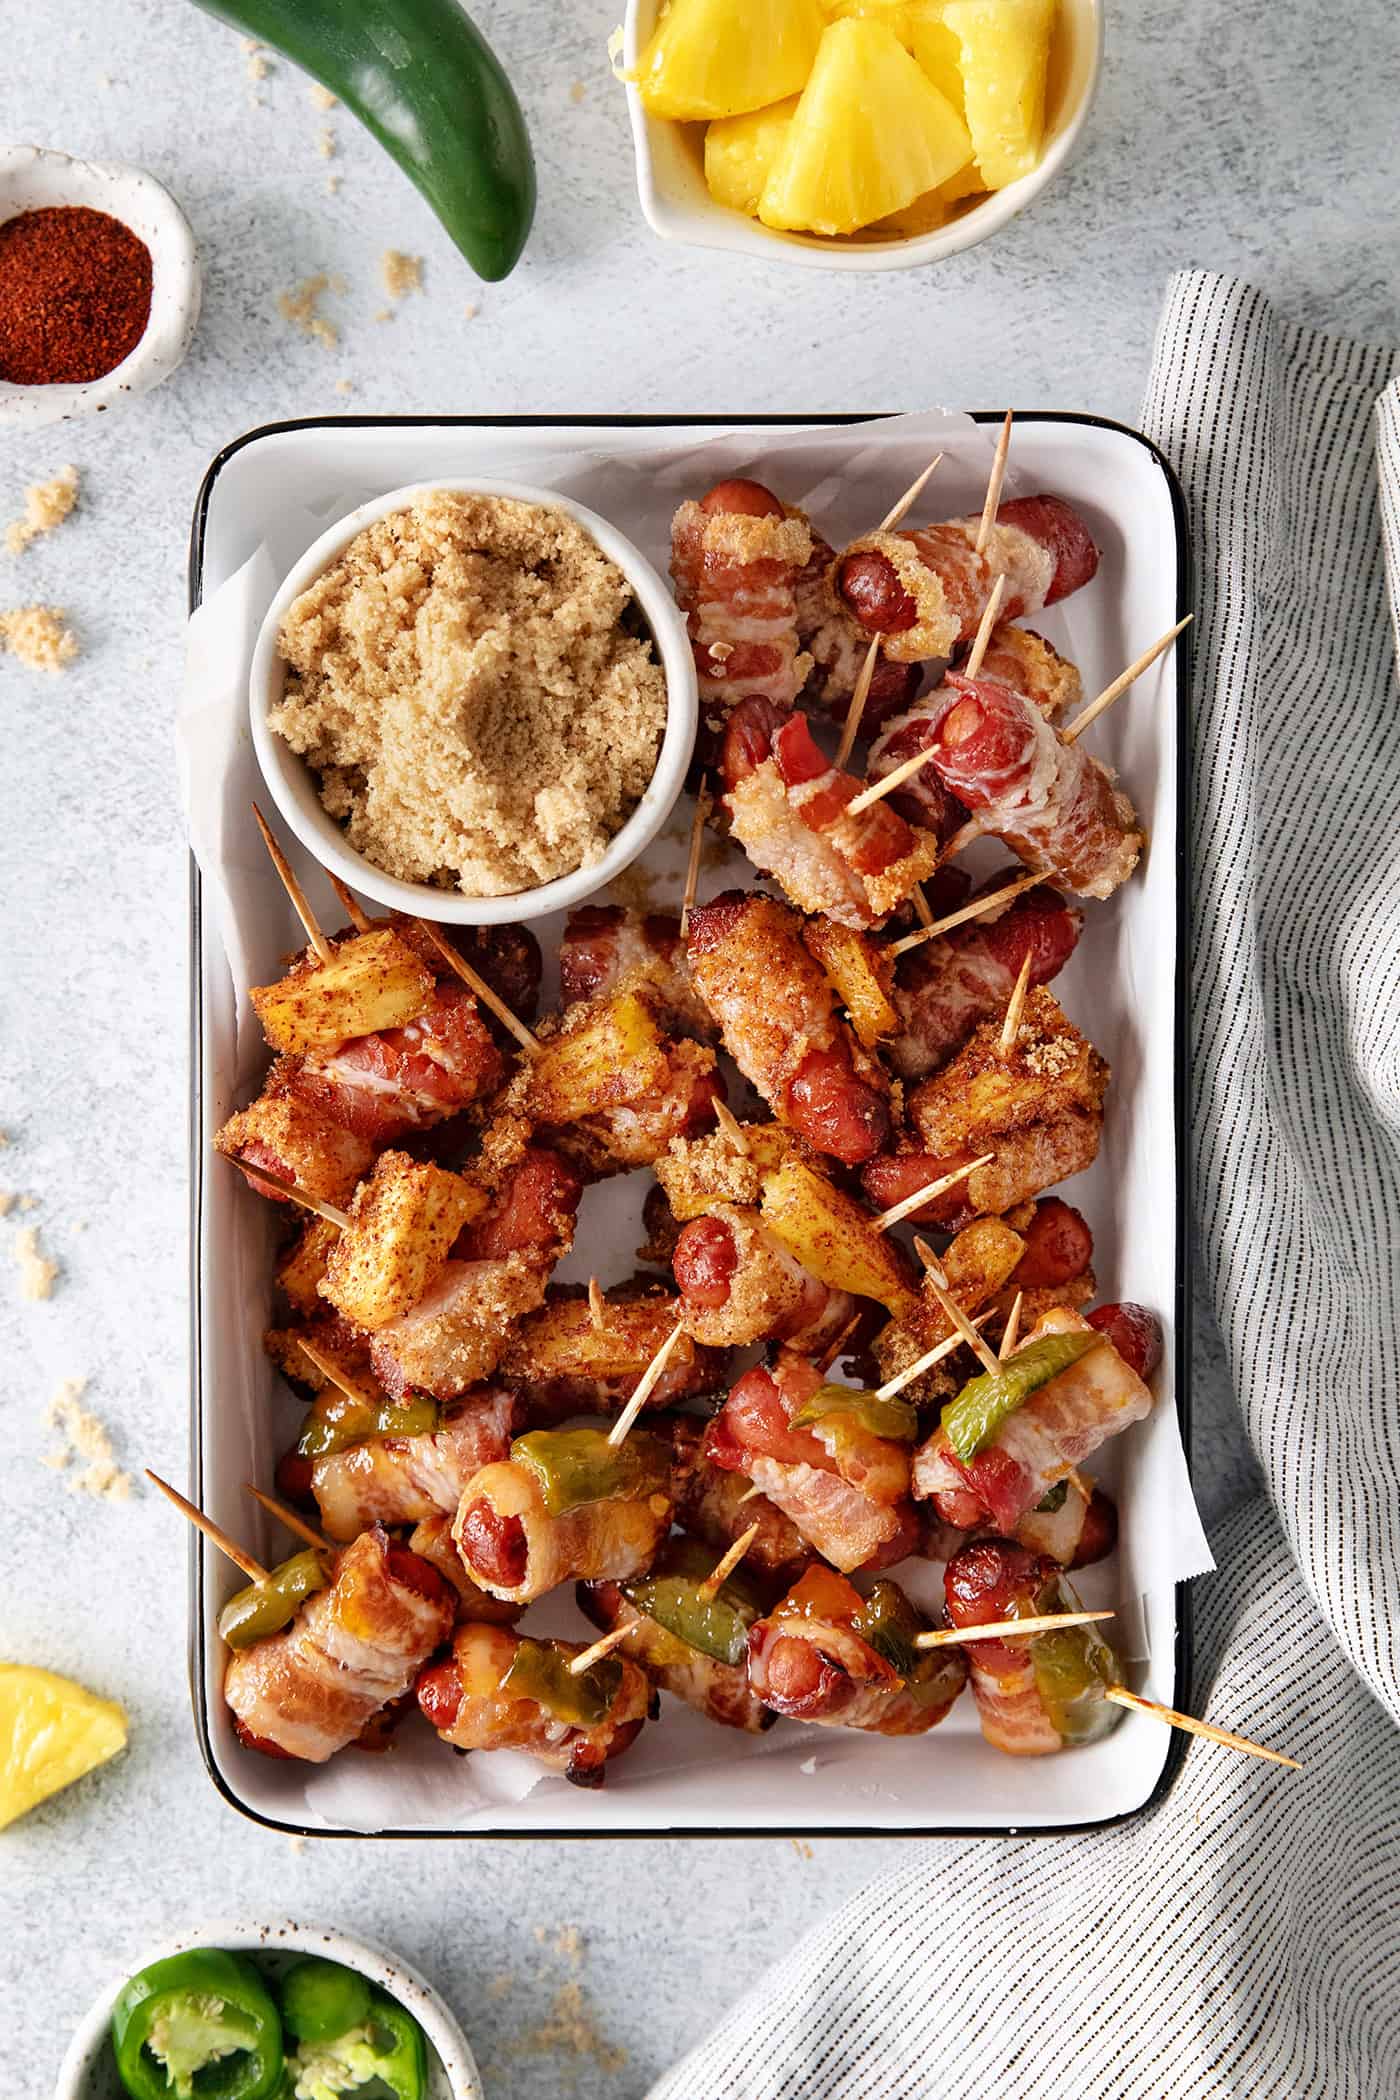 Overhead view of bacon wrapped little smokies on a serving platter with a bowl of brown sugar